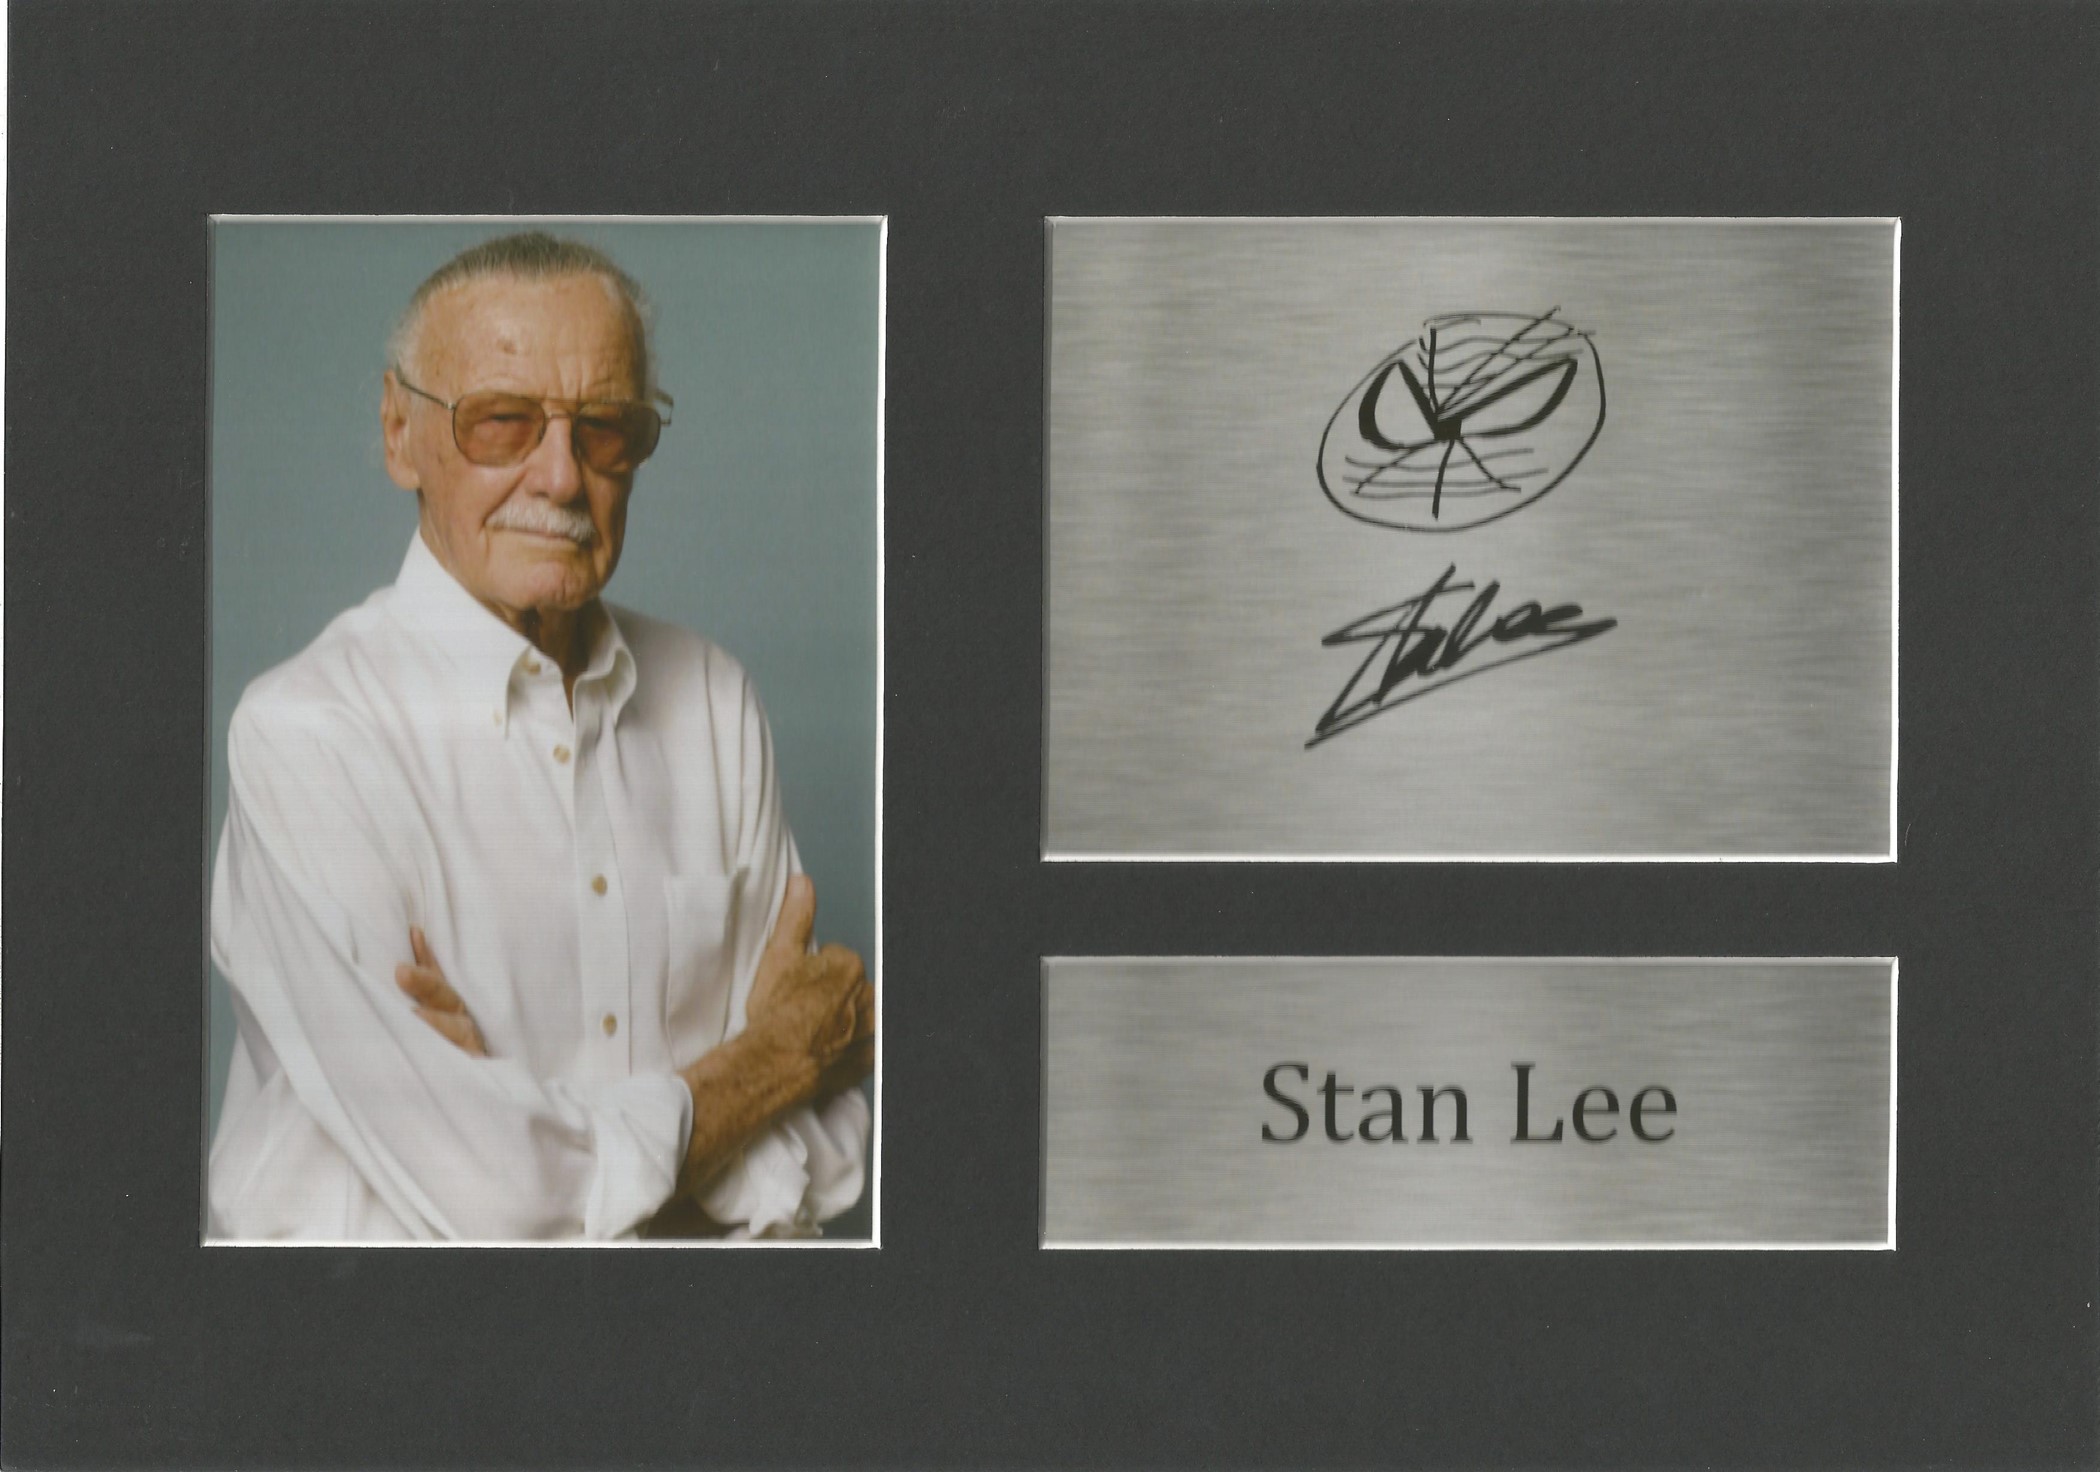 Marvel Comics, Stan Lee11x8 matted printed signature NOT HAND SIGNED piece. This beautifully